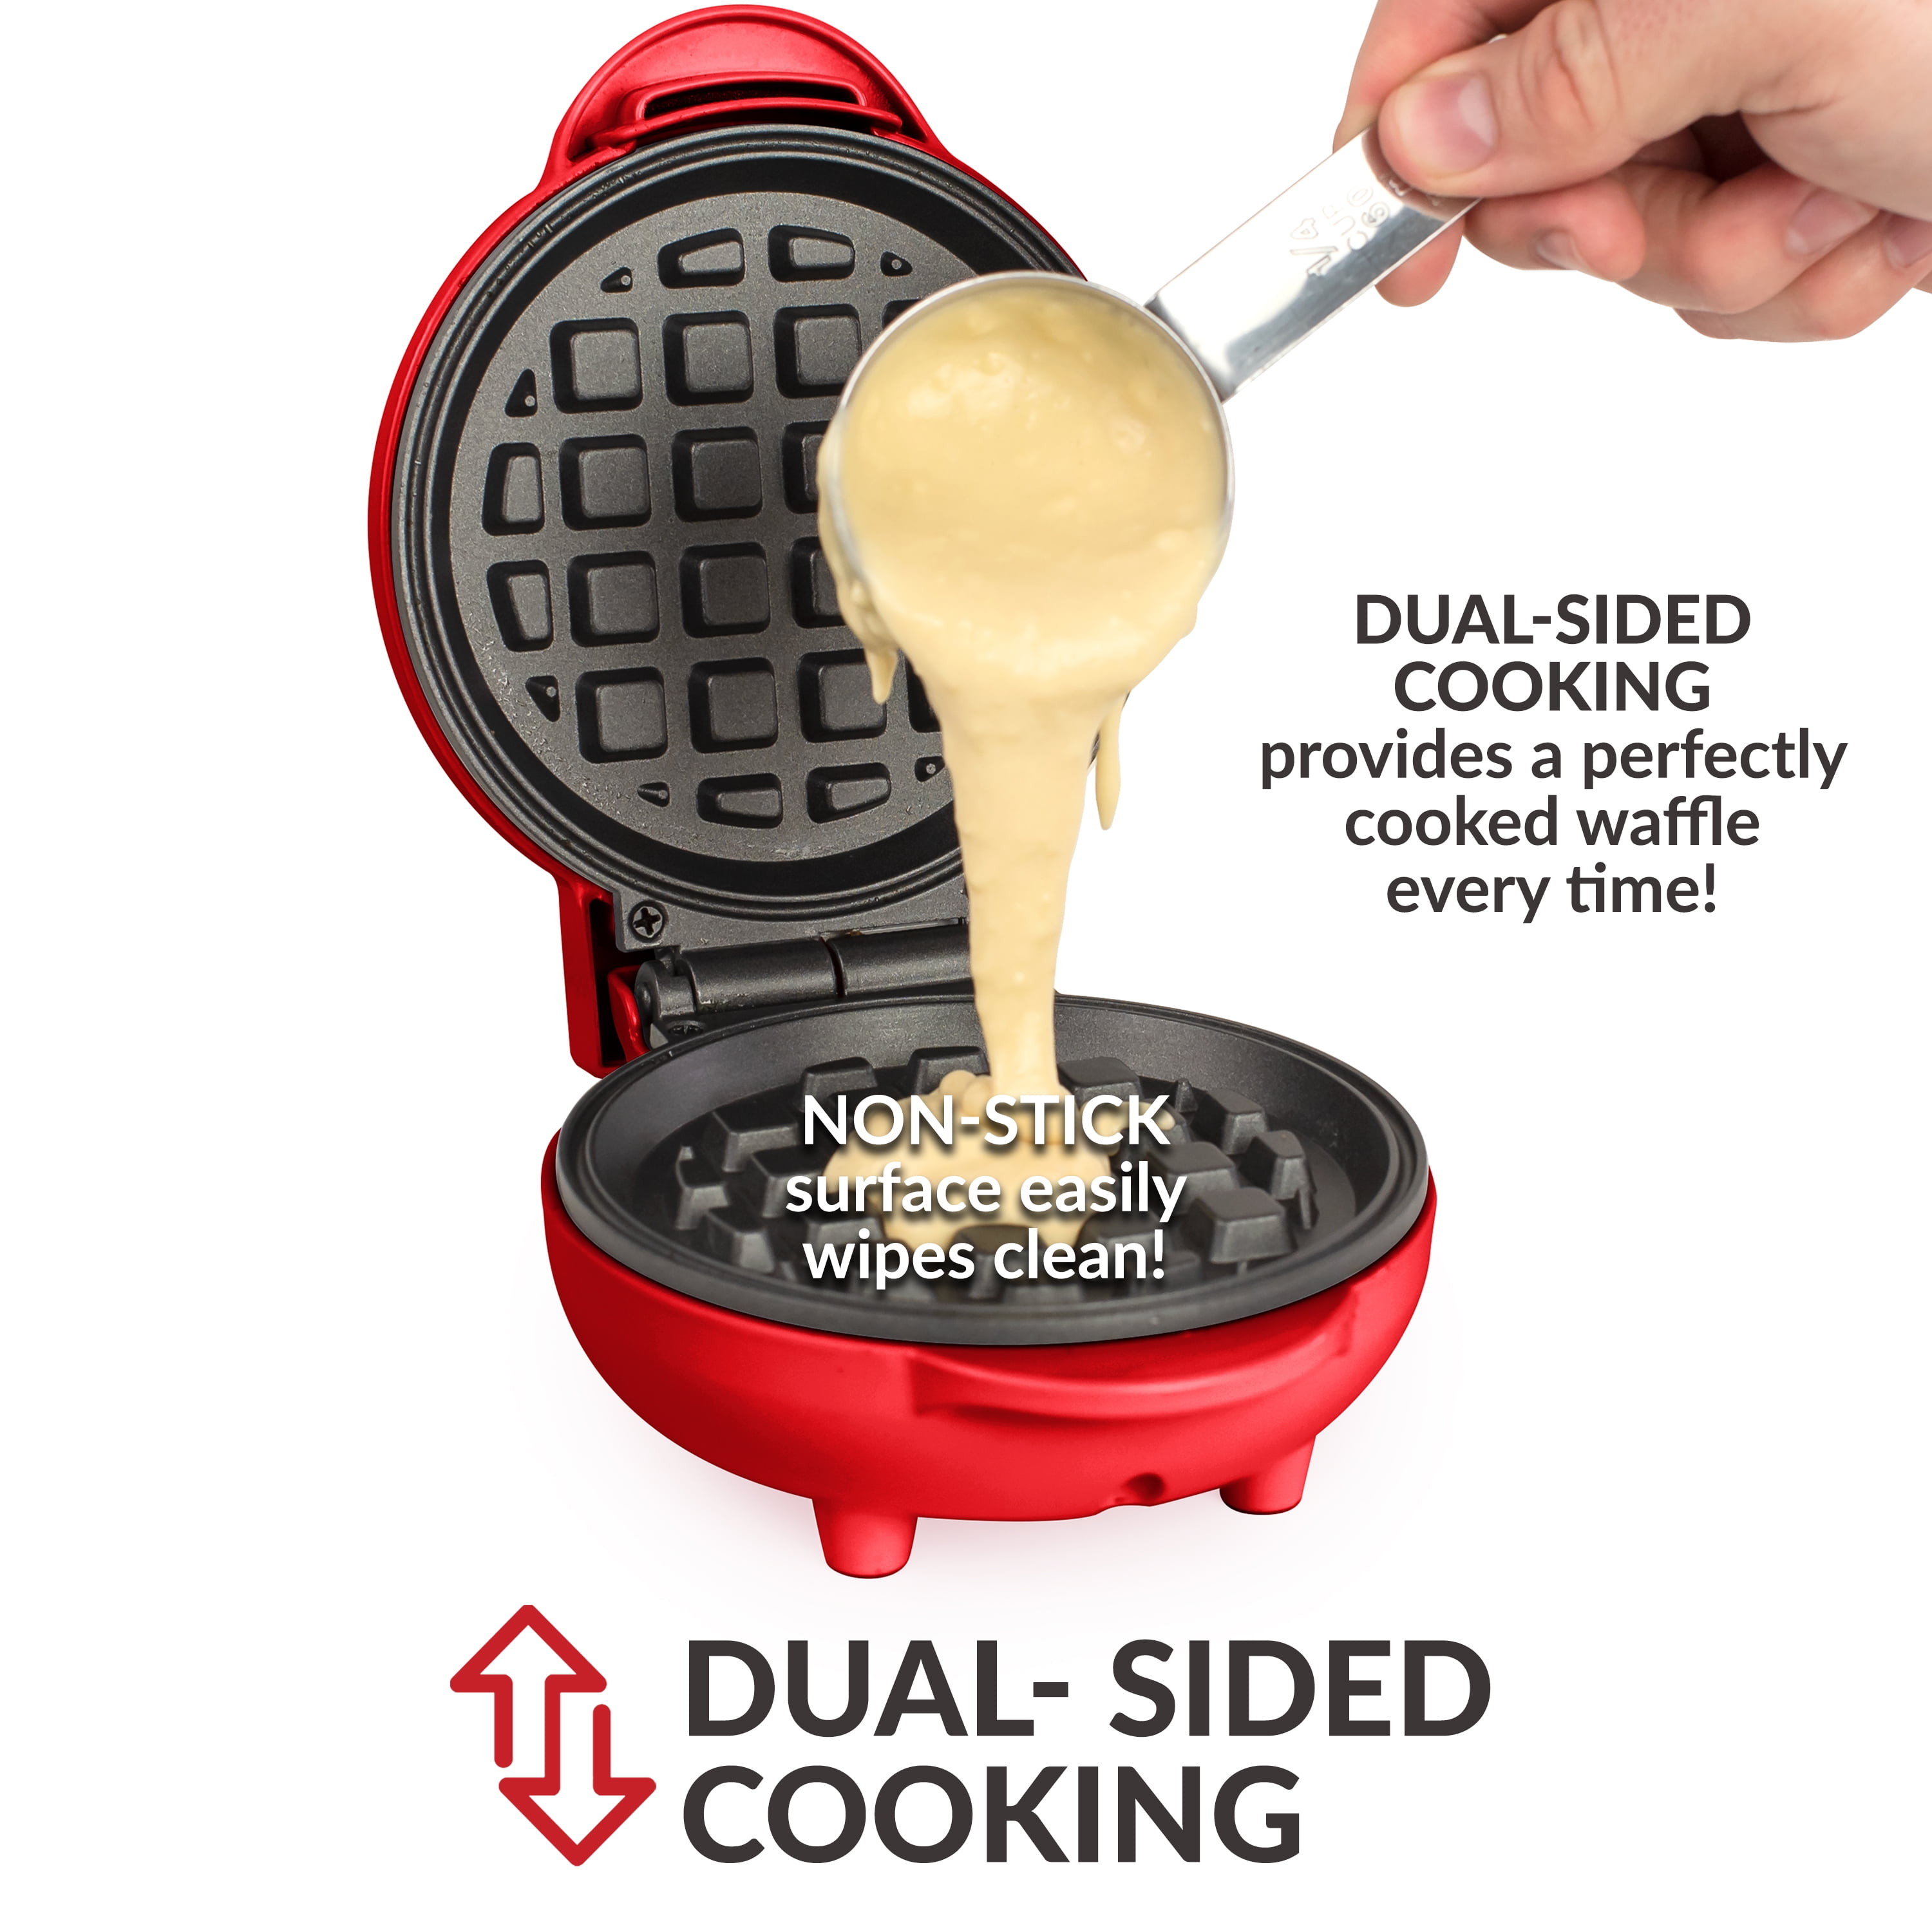 Nostalgia MyMini Personal electric waffle maker compact size 5 inch no -  appliances - by owner - sale - craigslist